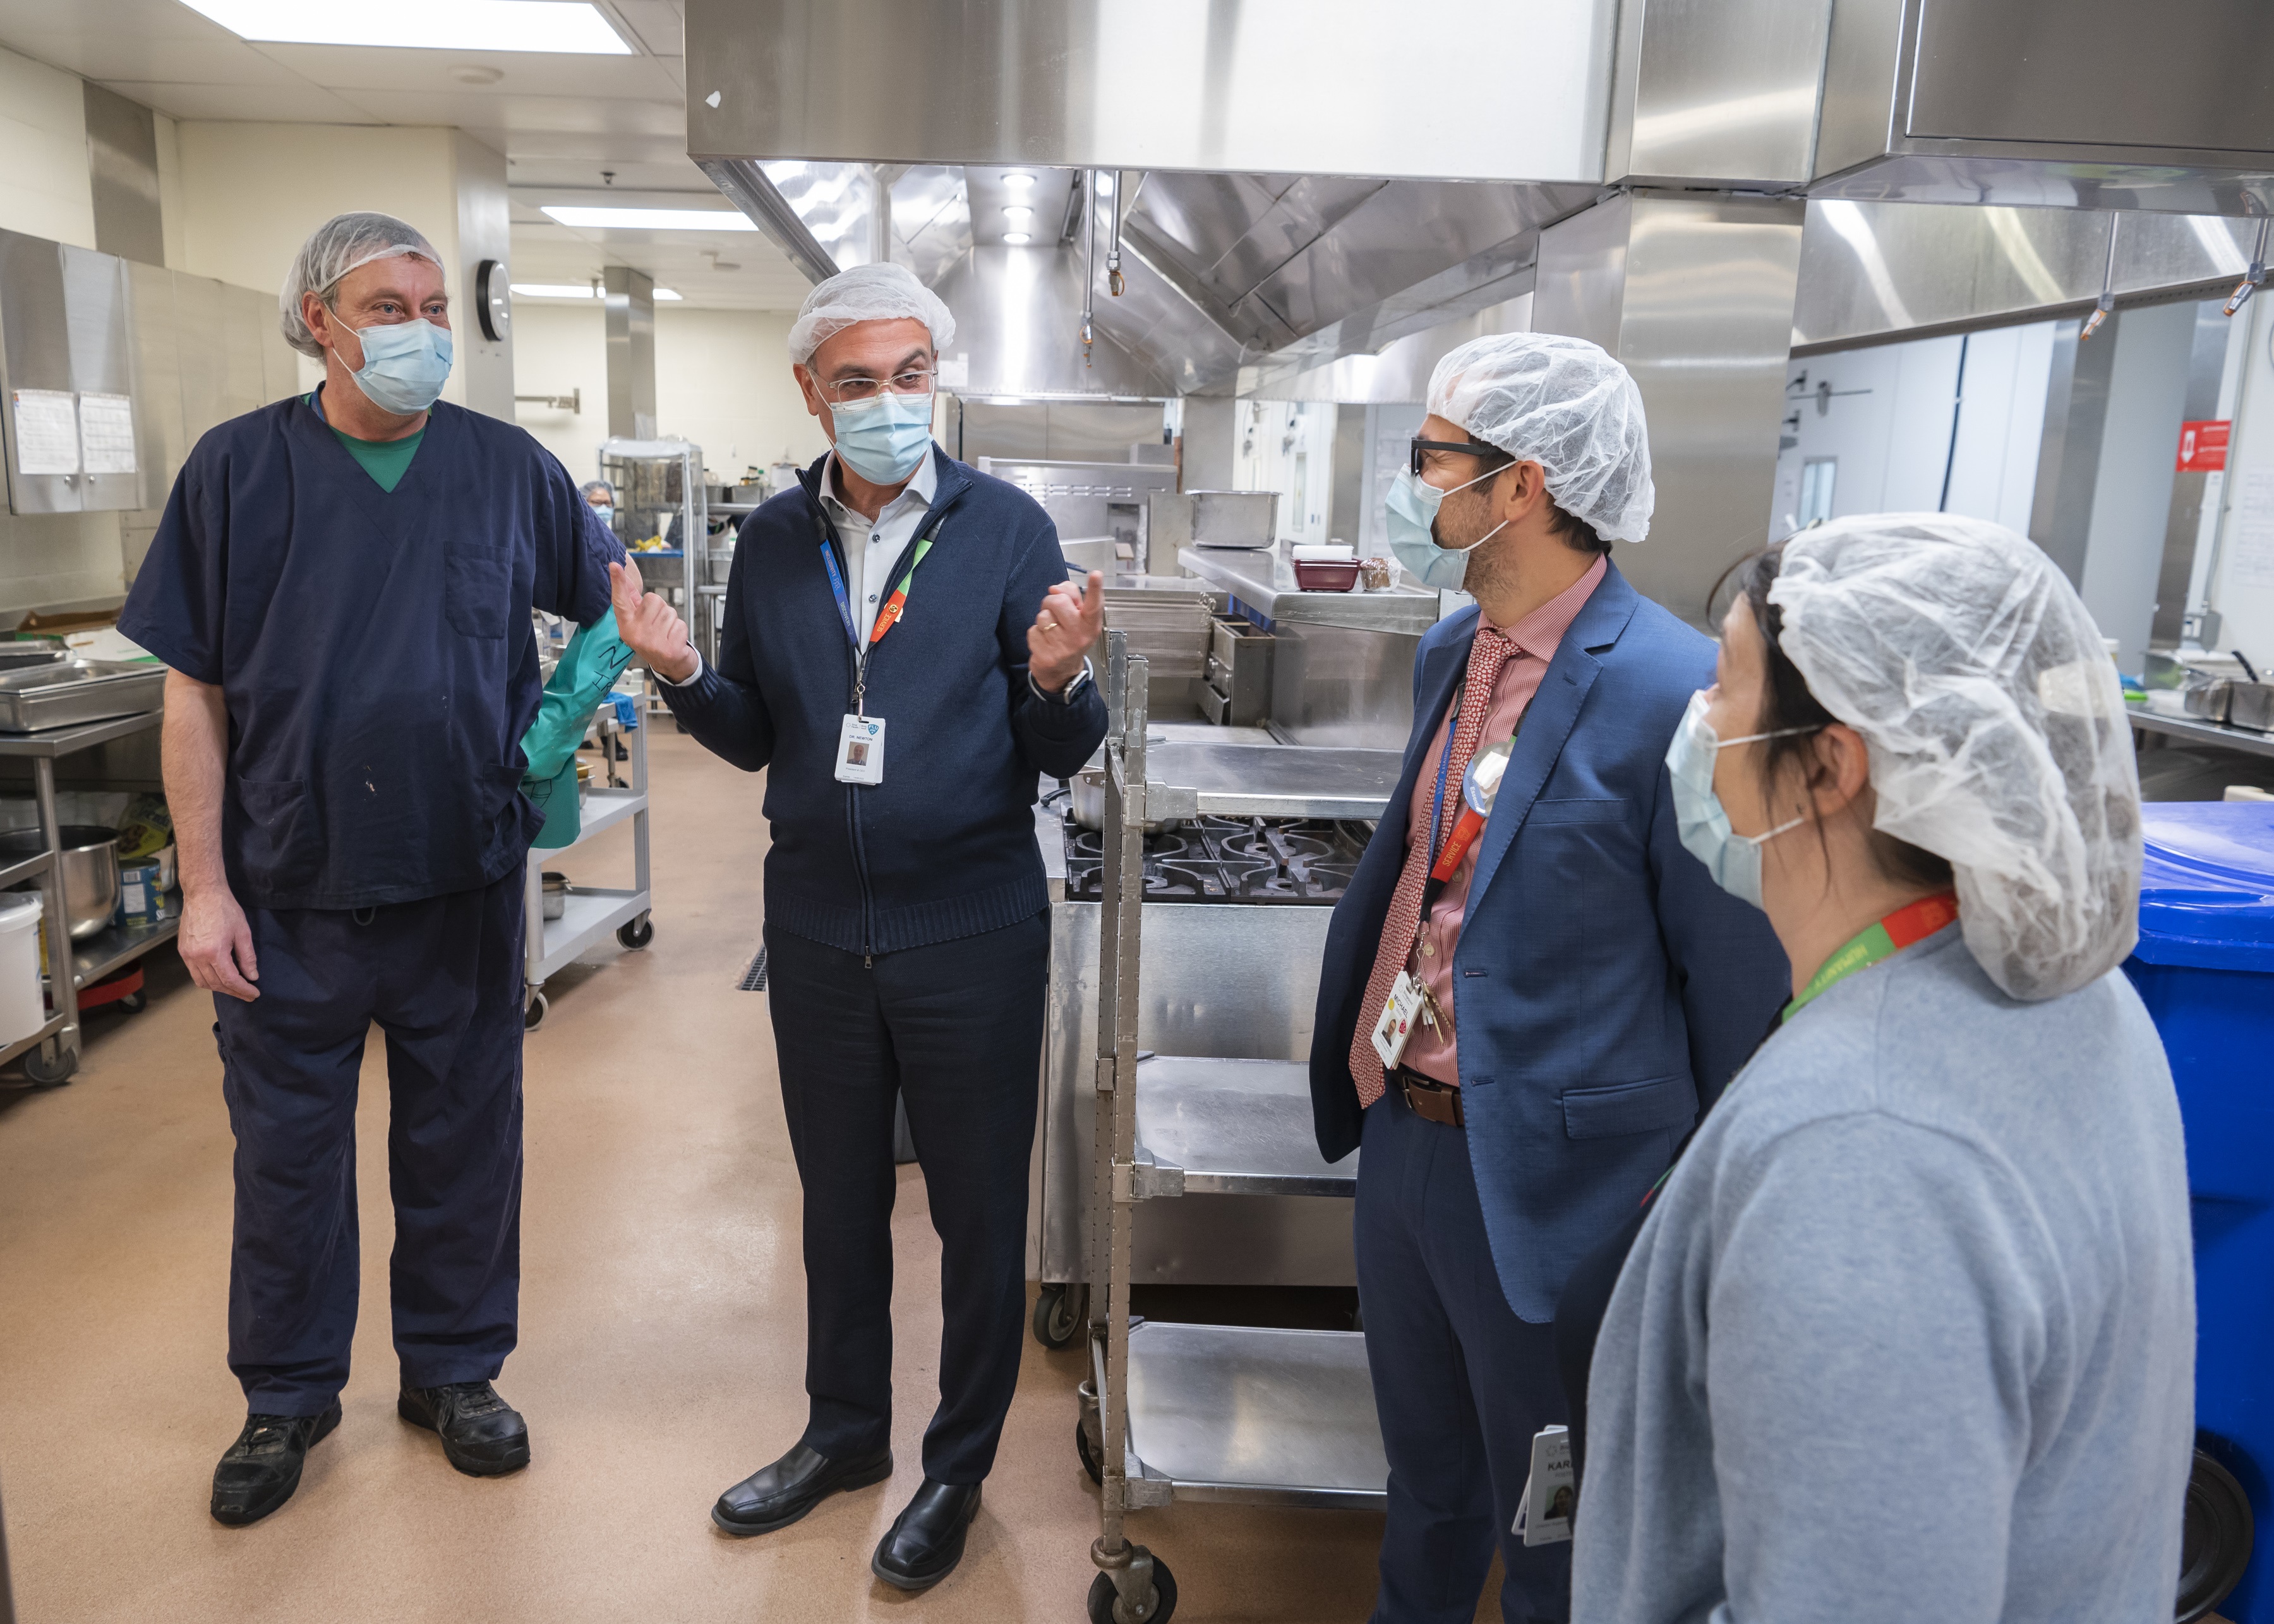 Dr. Gary Newton talks with employees in the Food Services kitchen at Hennick Bridgepoint Hospital